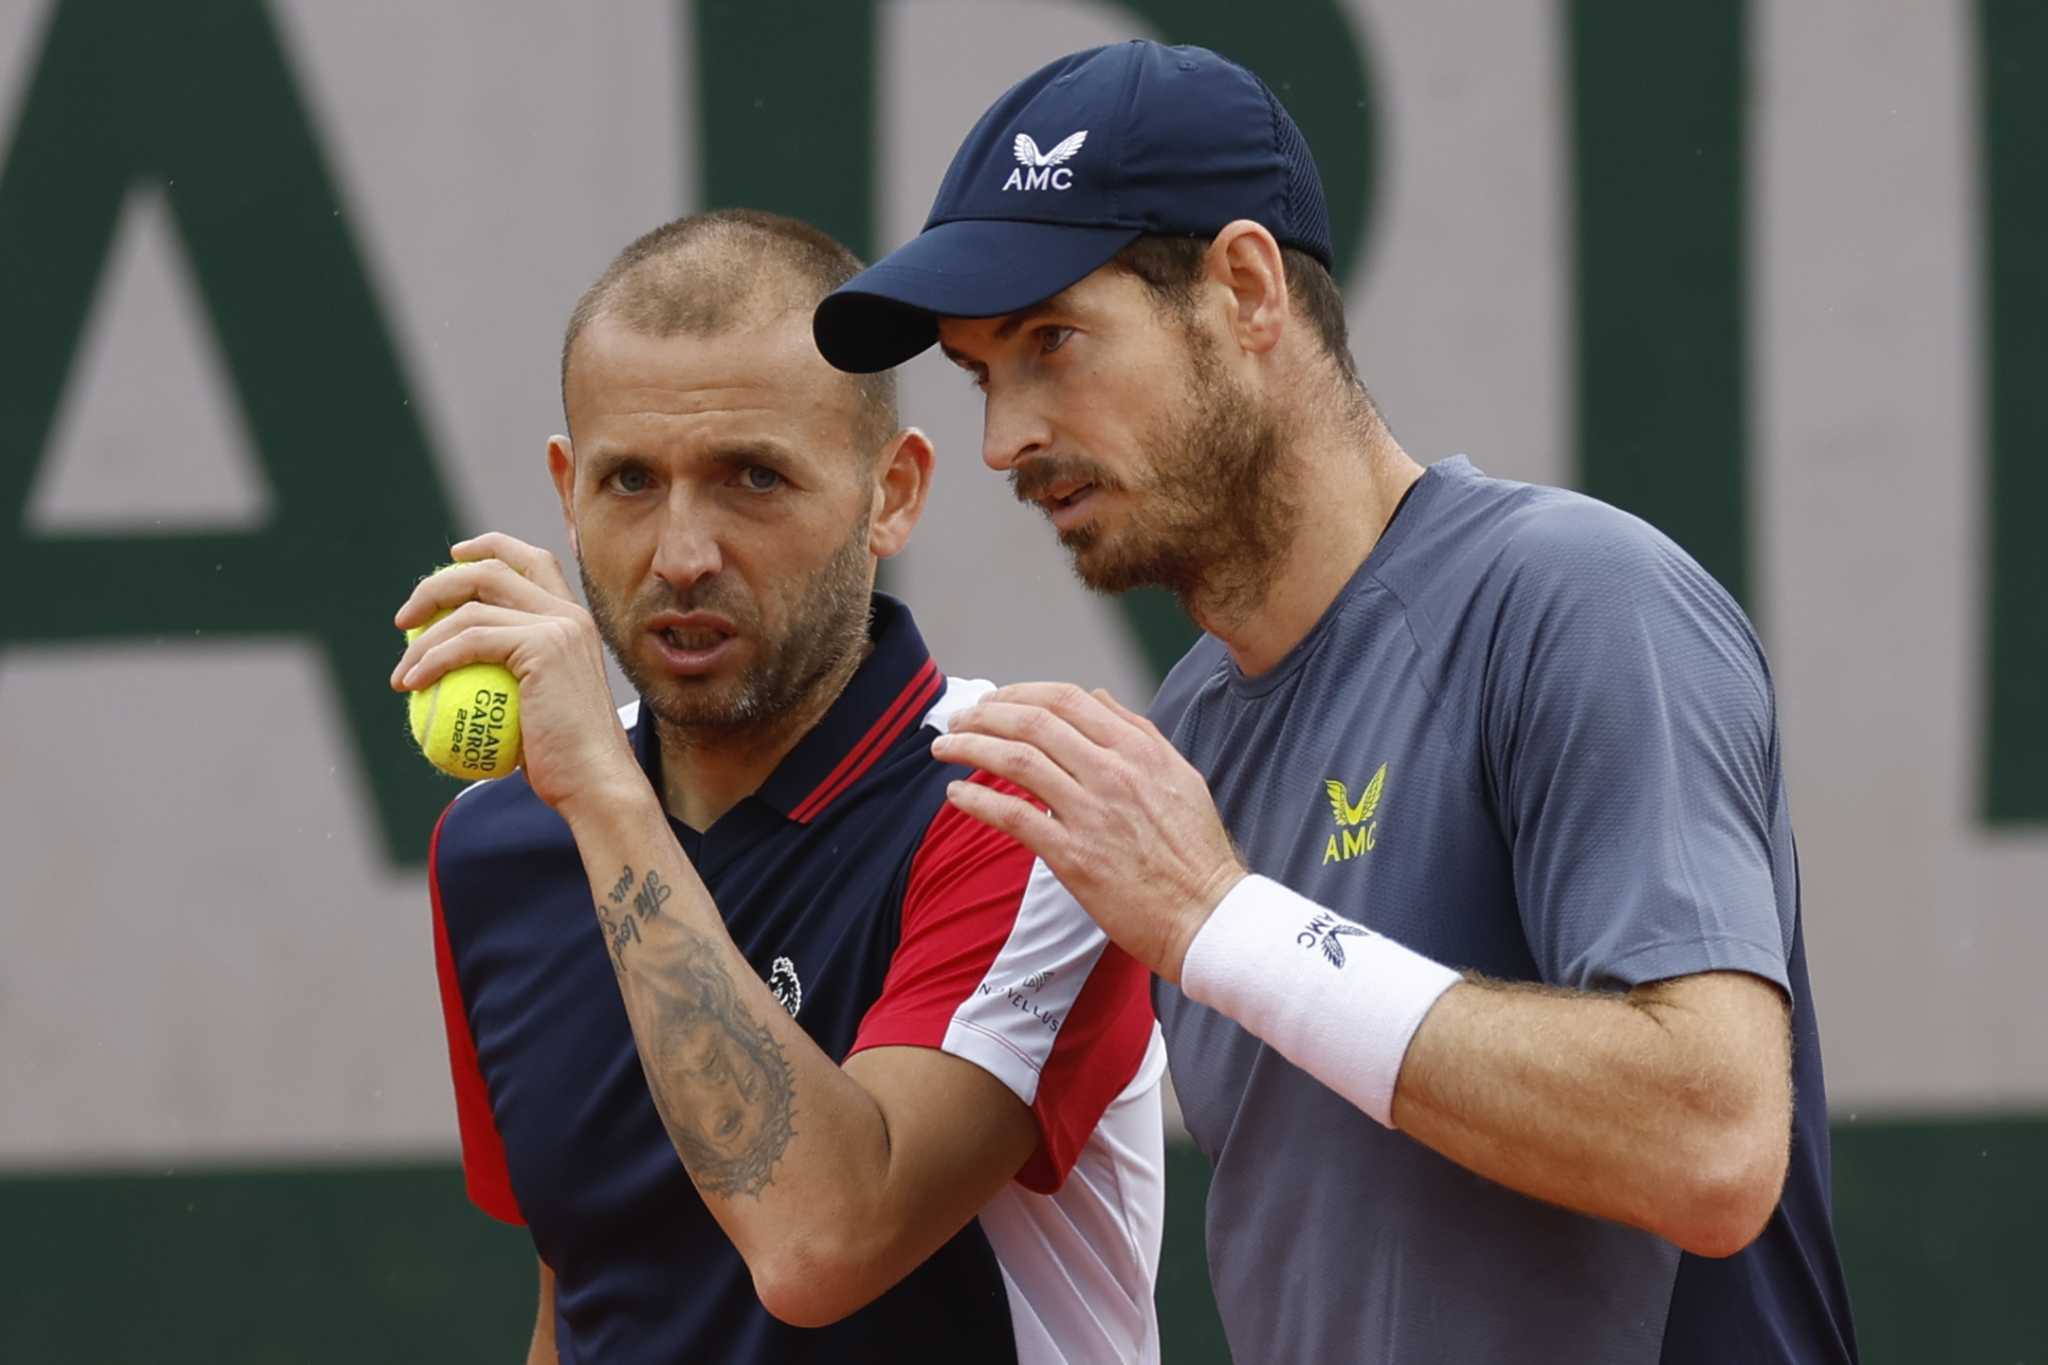 Andy Murray and Dan Evans lose in the first round of doubles at the